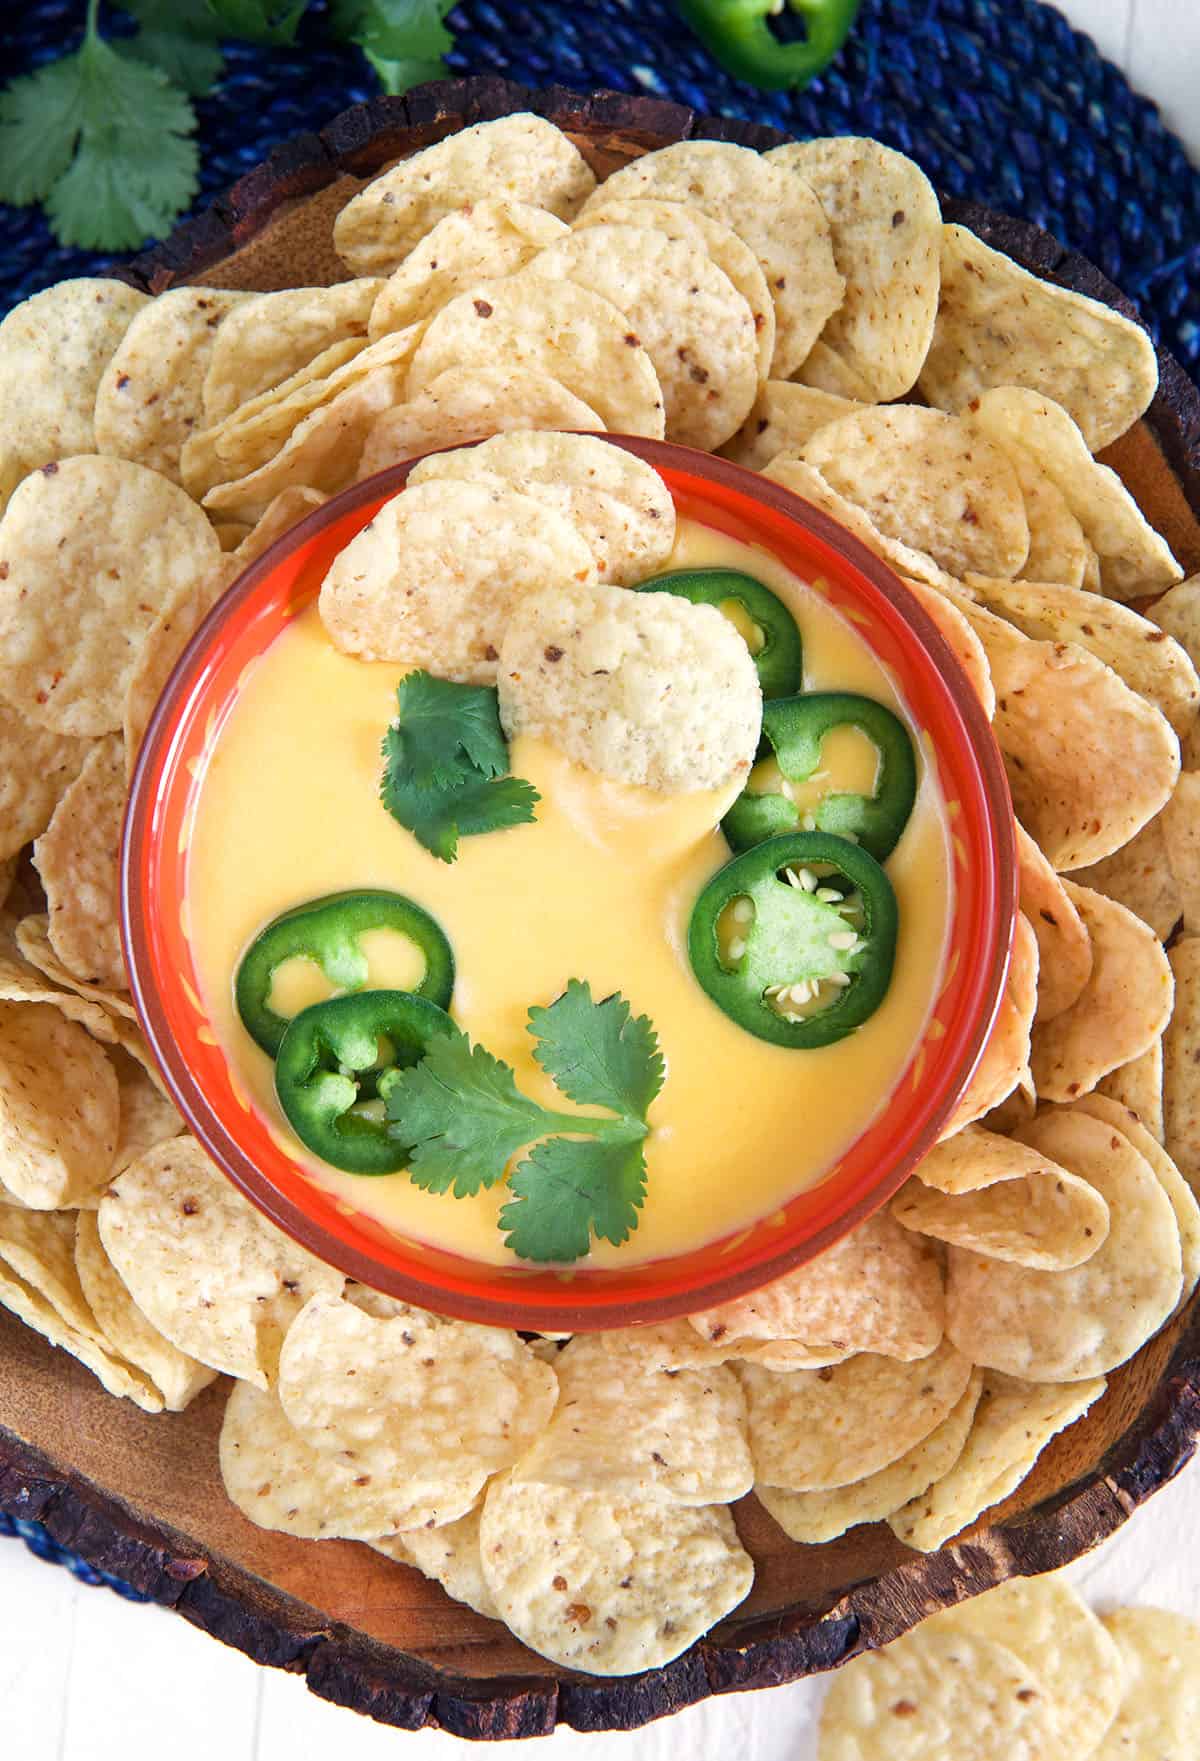 A small bowl is filled with nacho cheese and topped with jalapenos, and it's surrounded by round tortilla chips.